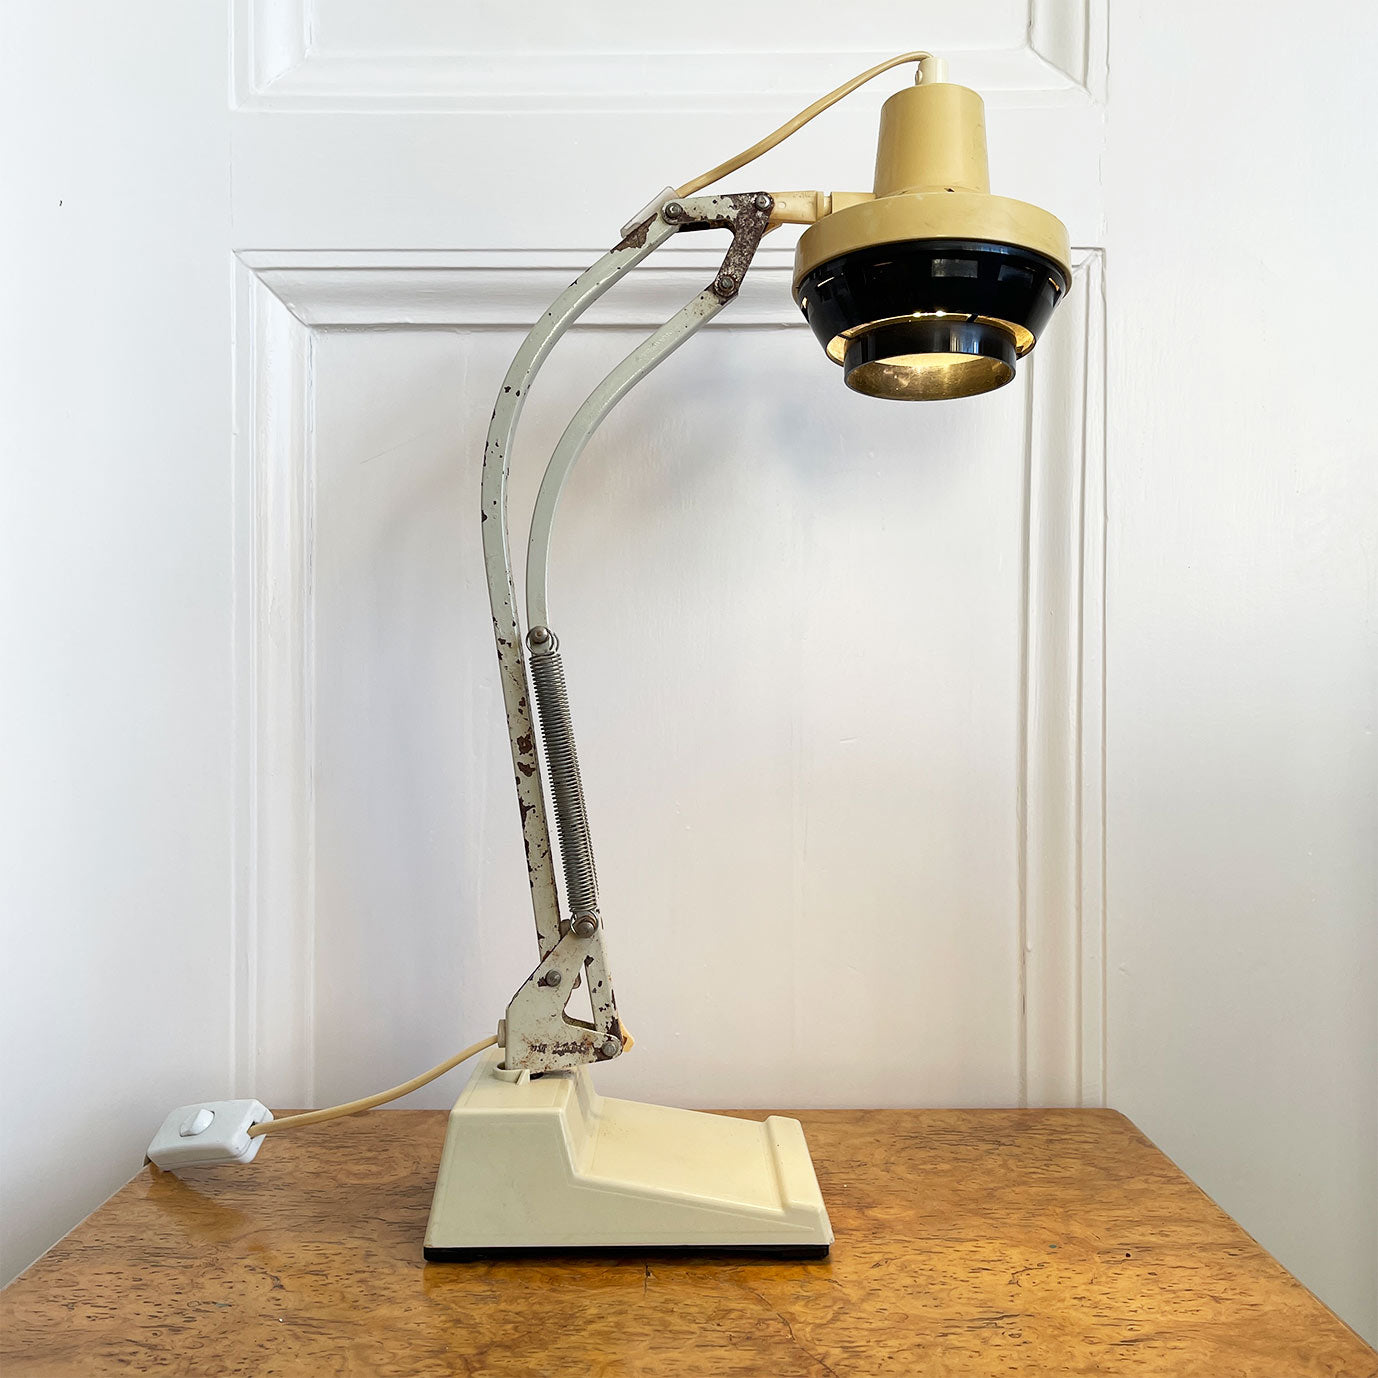 A cool Swedish Waso Ledu Type 3842 Lamp. Made by WASO of Sweden, this classic lamp is really well made and heavy. It has an unusual curved arm to it and is mounted atop a solid plastic base. It has its original Ledu sticker and is marked 'MADE IN SWEDEN' on the base - SHOP NOW - www.intovintage.co.uk